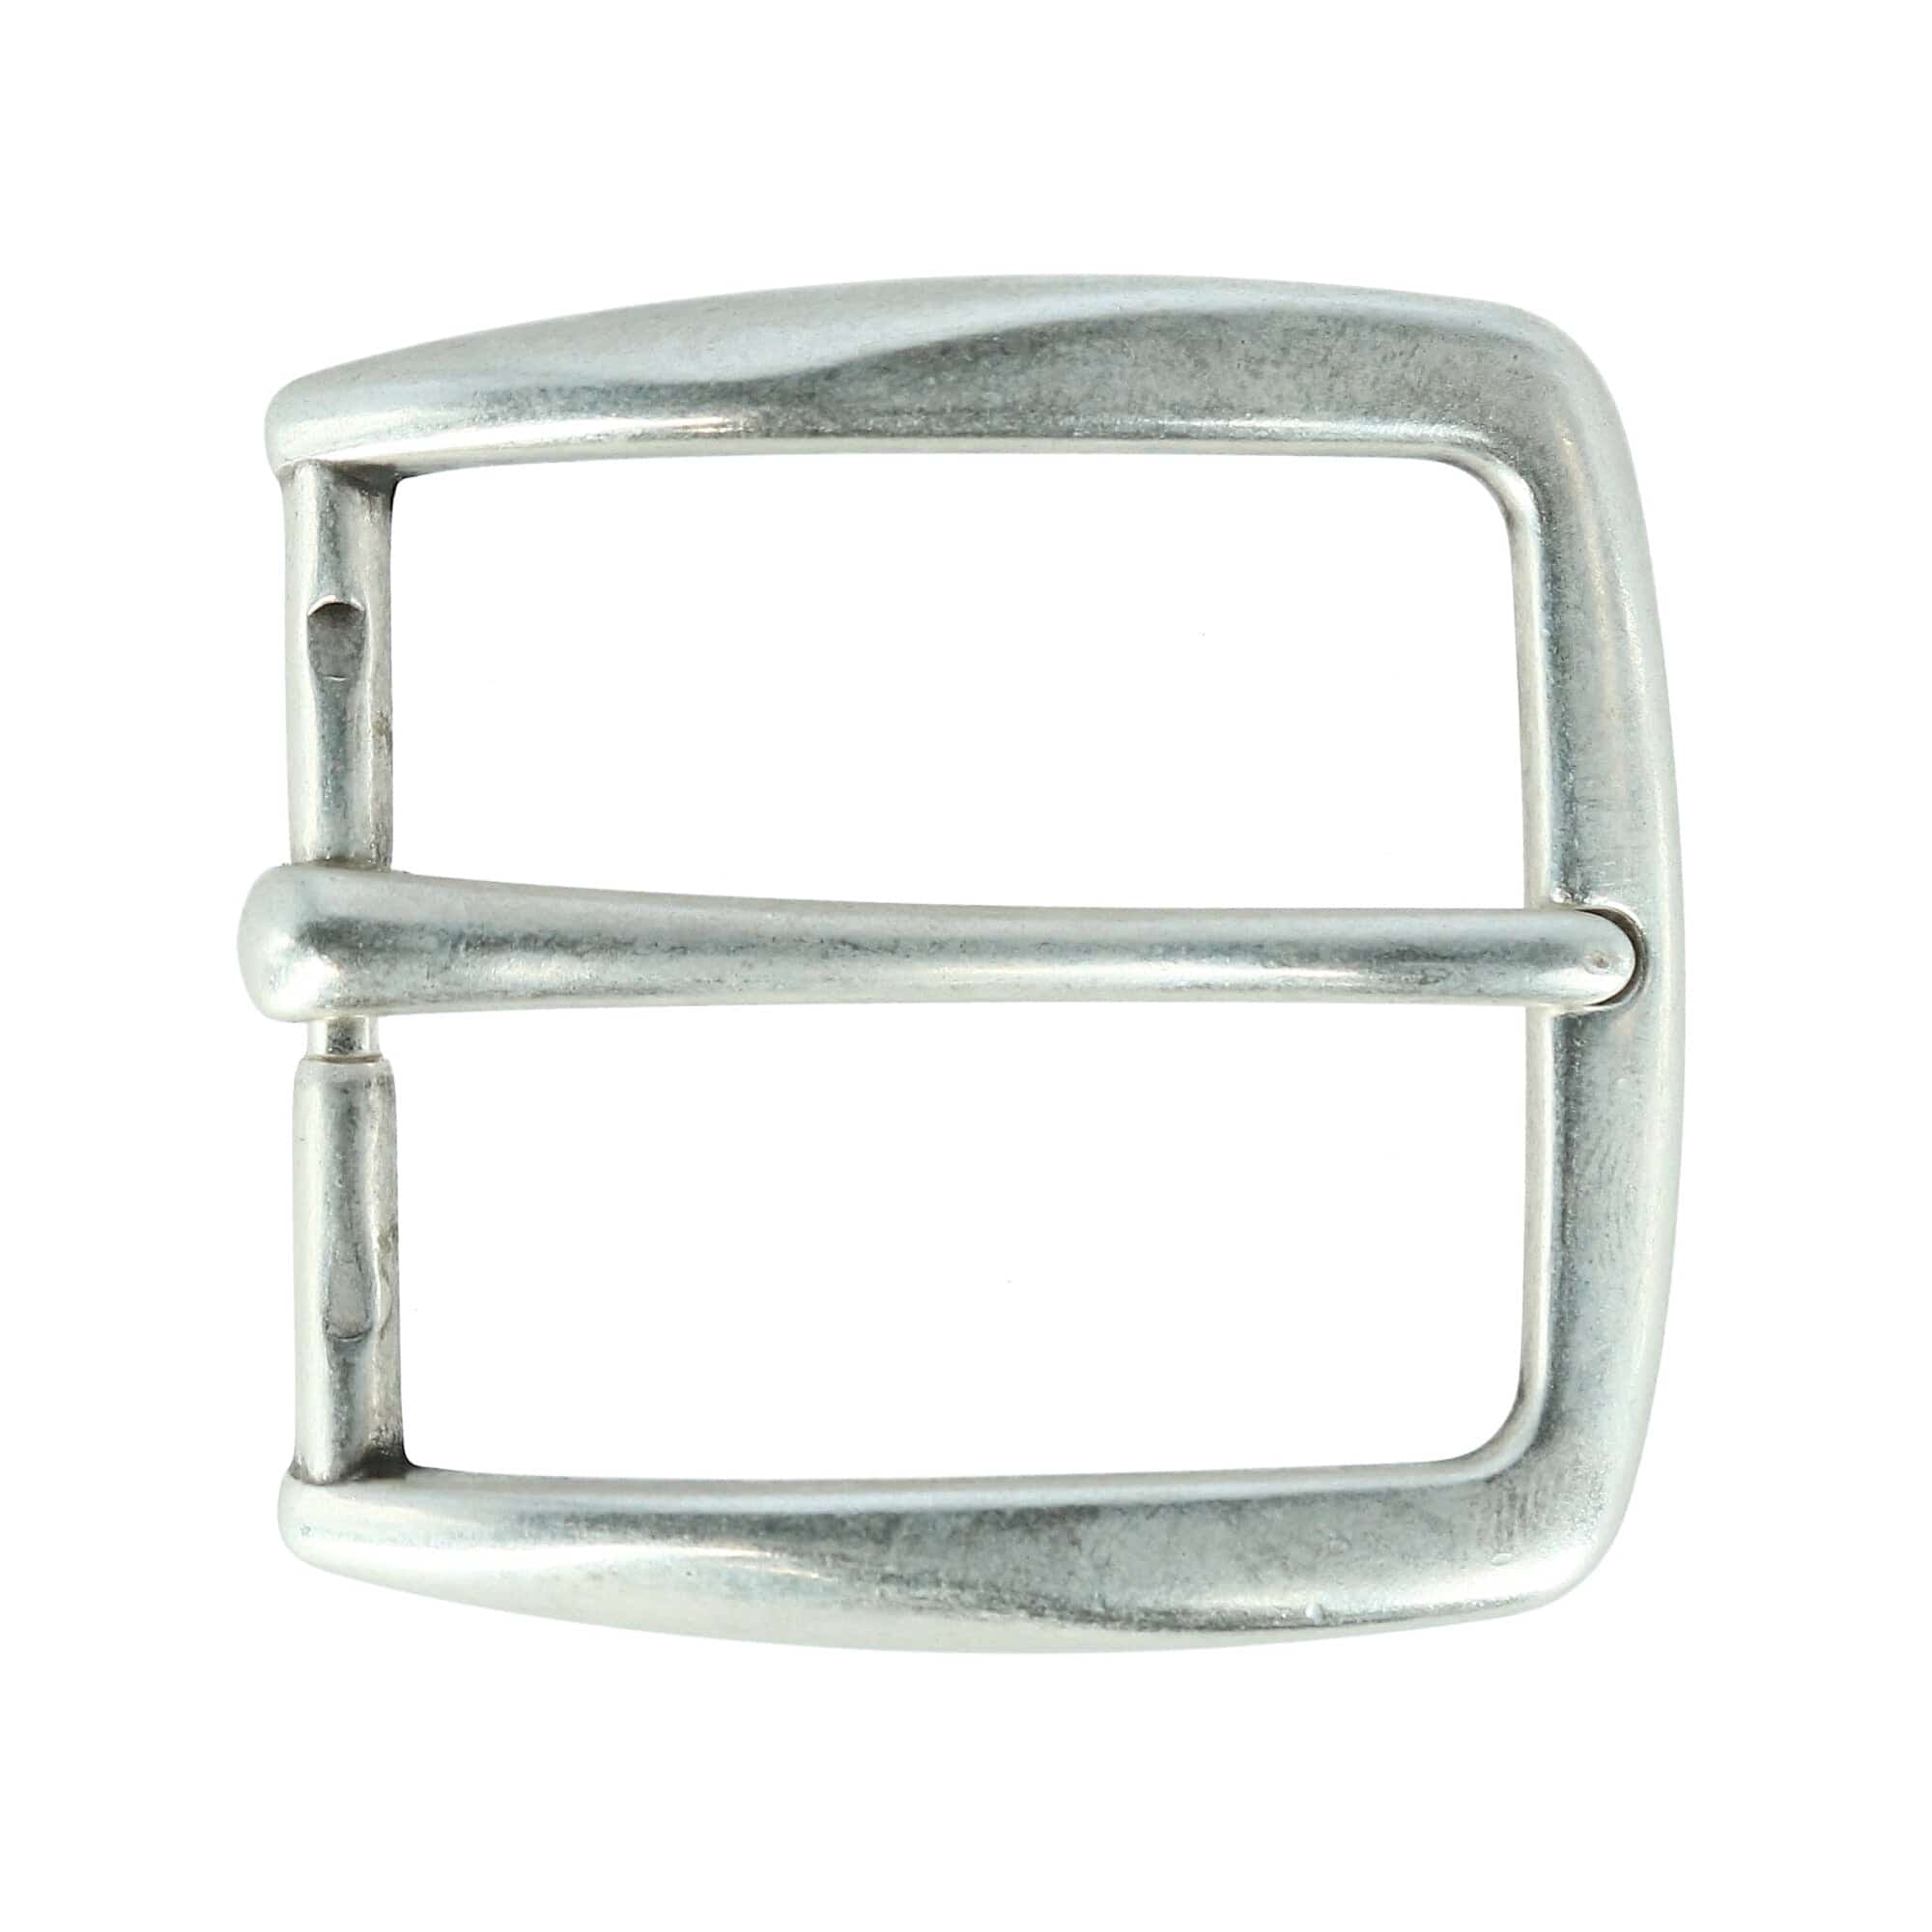 Replacement 40mm Stainless Steel Square Single Prong Belt Buckle Durable